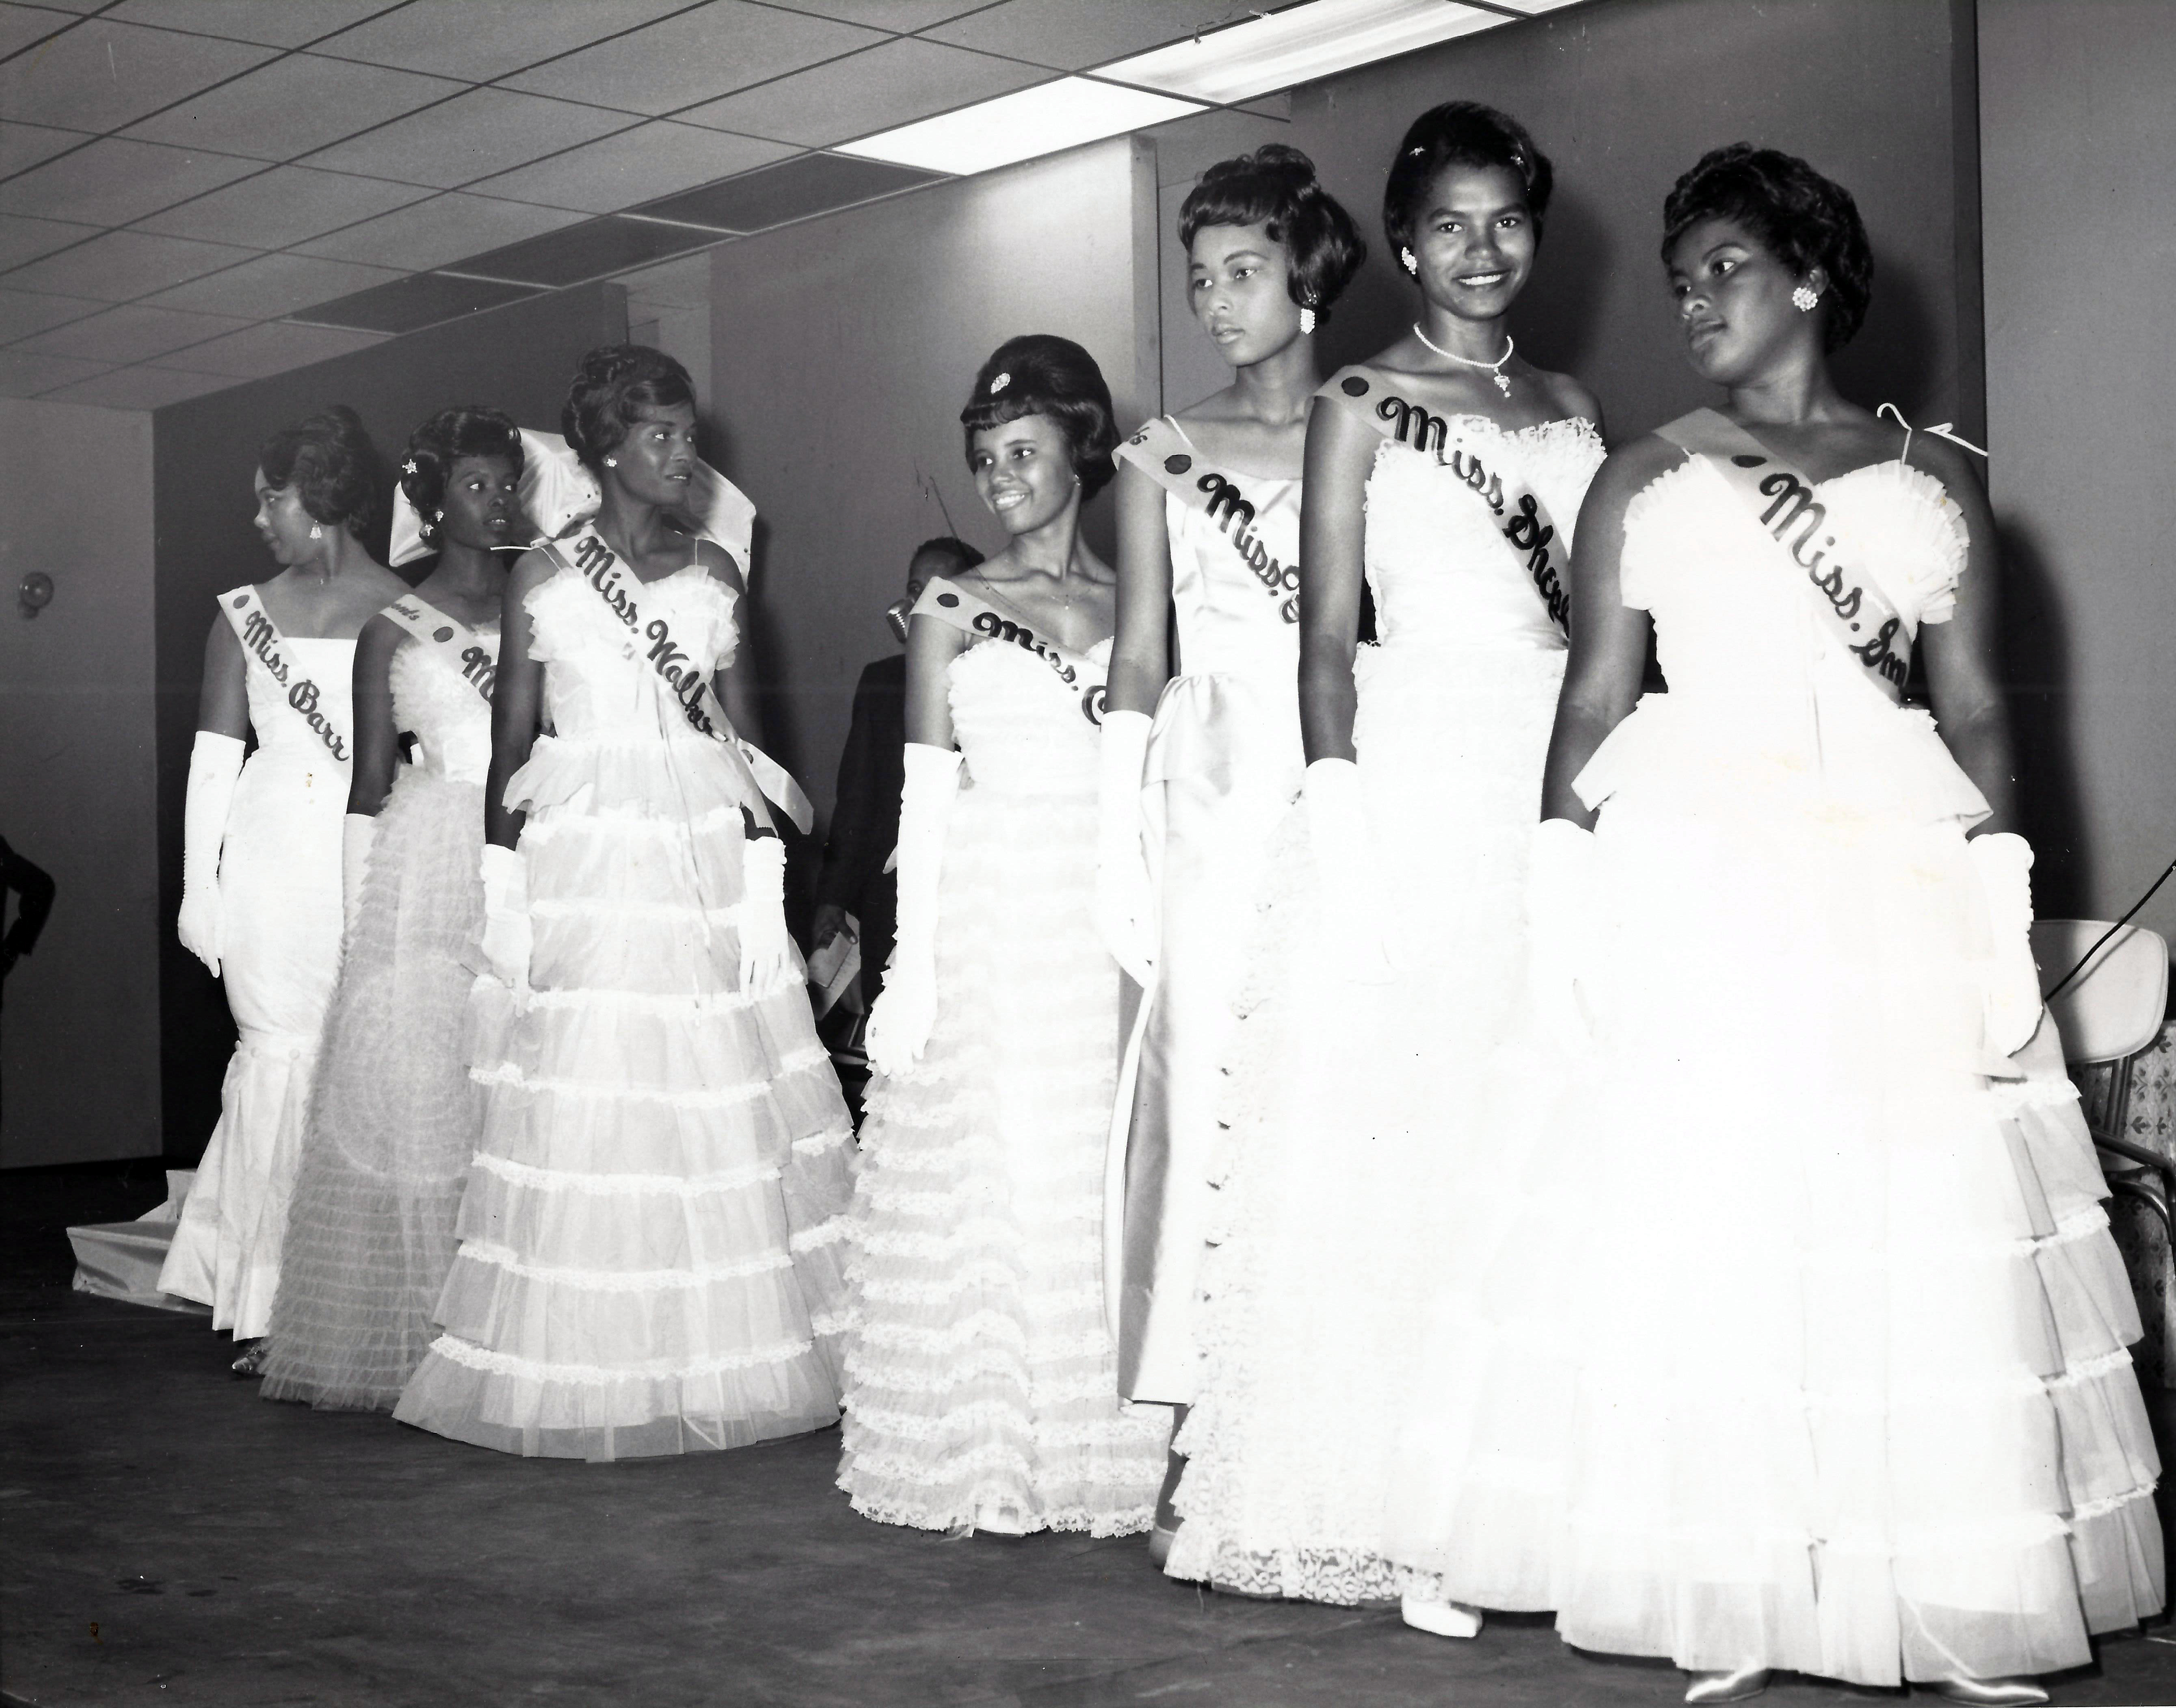 Beauty pageant contestants, 1960's